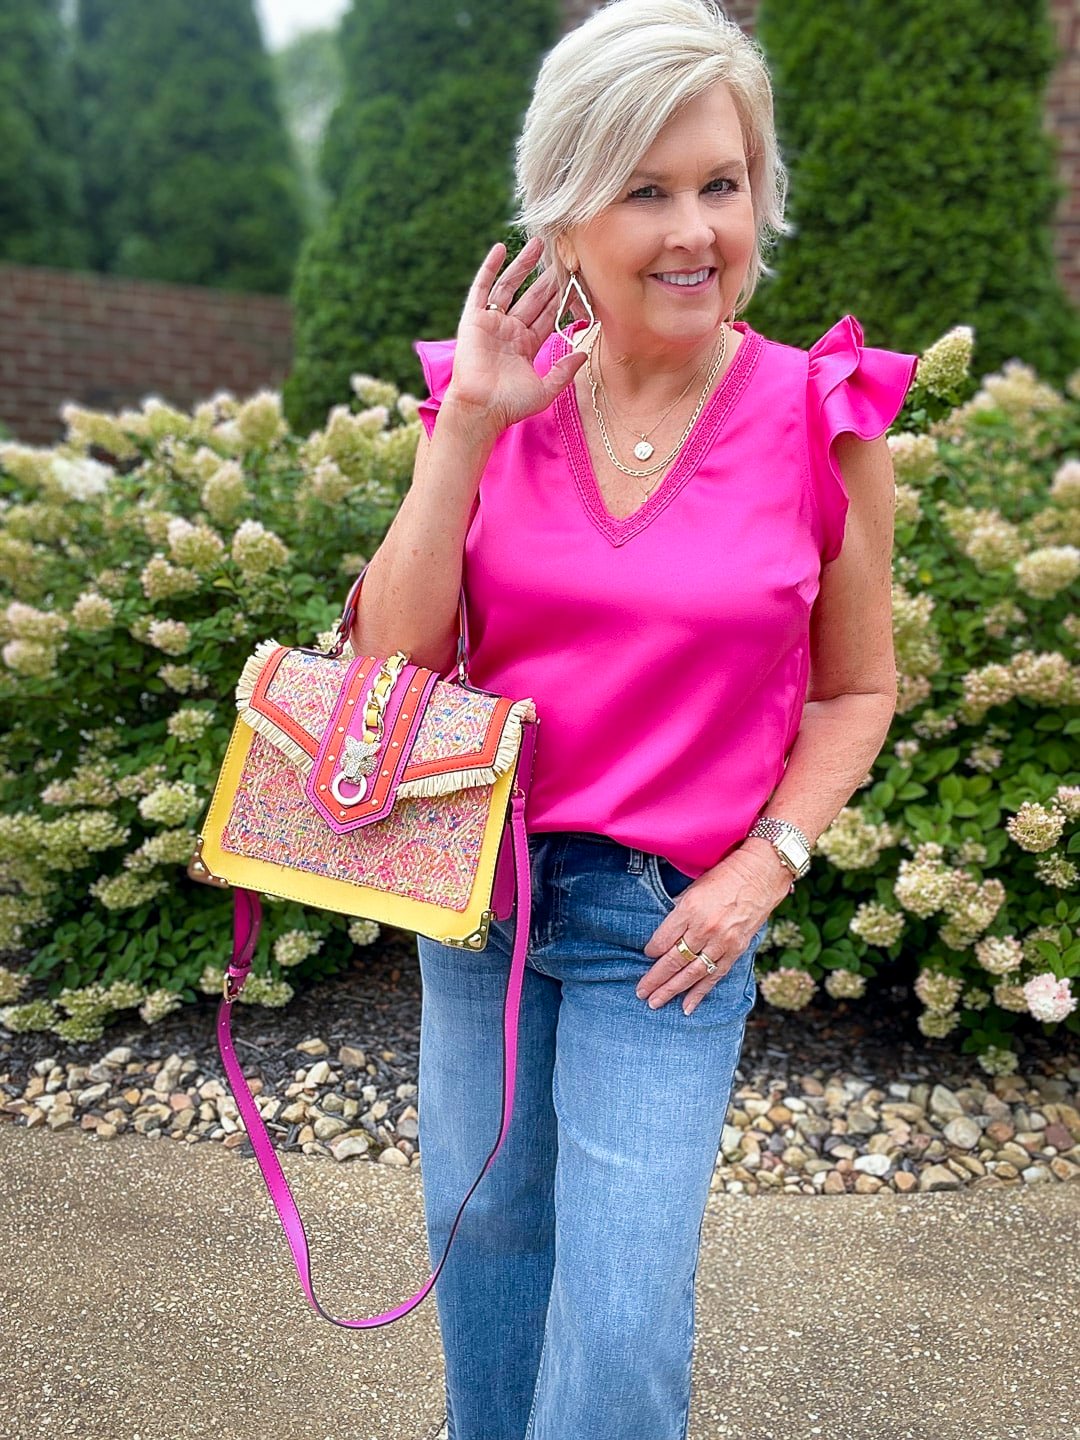 Over 40 Fashion Blogger, Tania Stephens is styling wide leg jeans with a pink ruffled top13